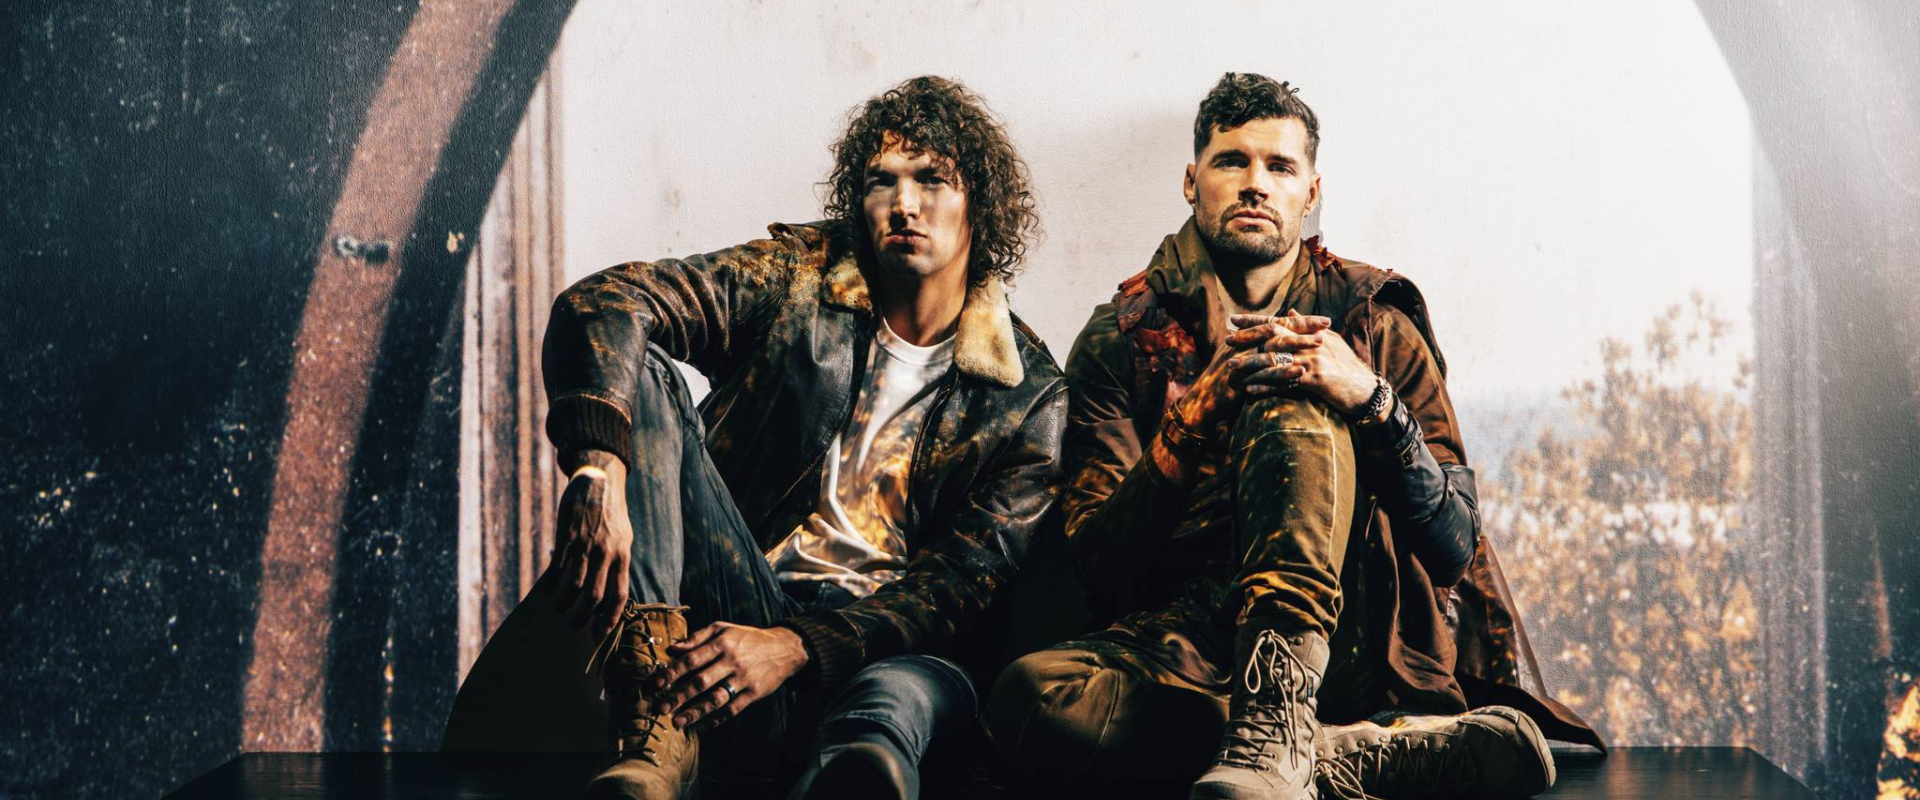 For King & Country Set to Release New Movie “Unsung Hero” on April 26th